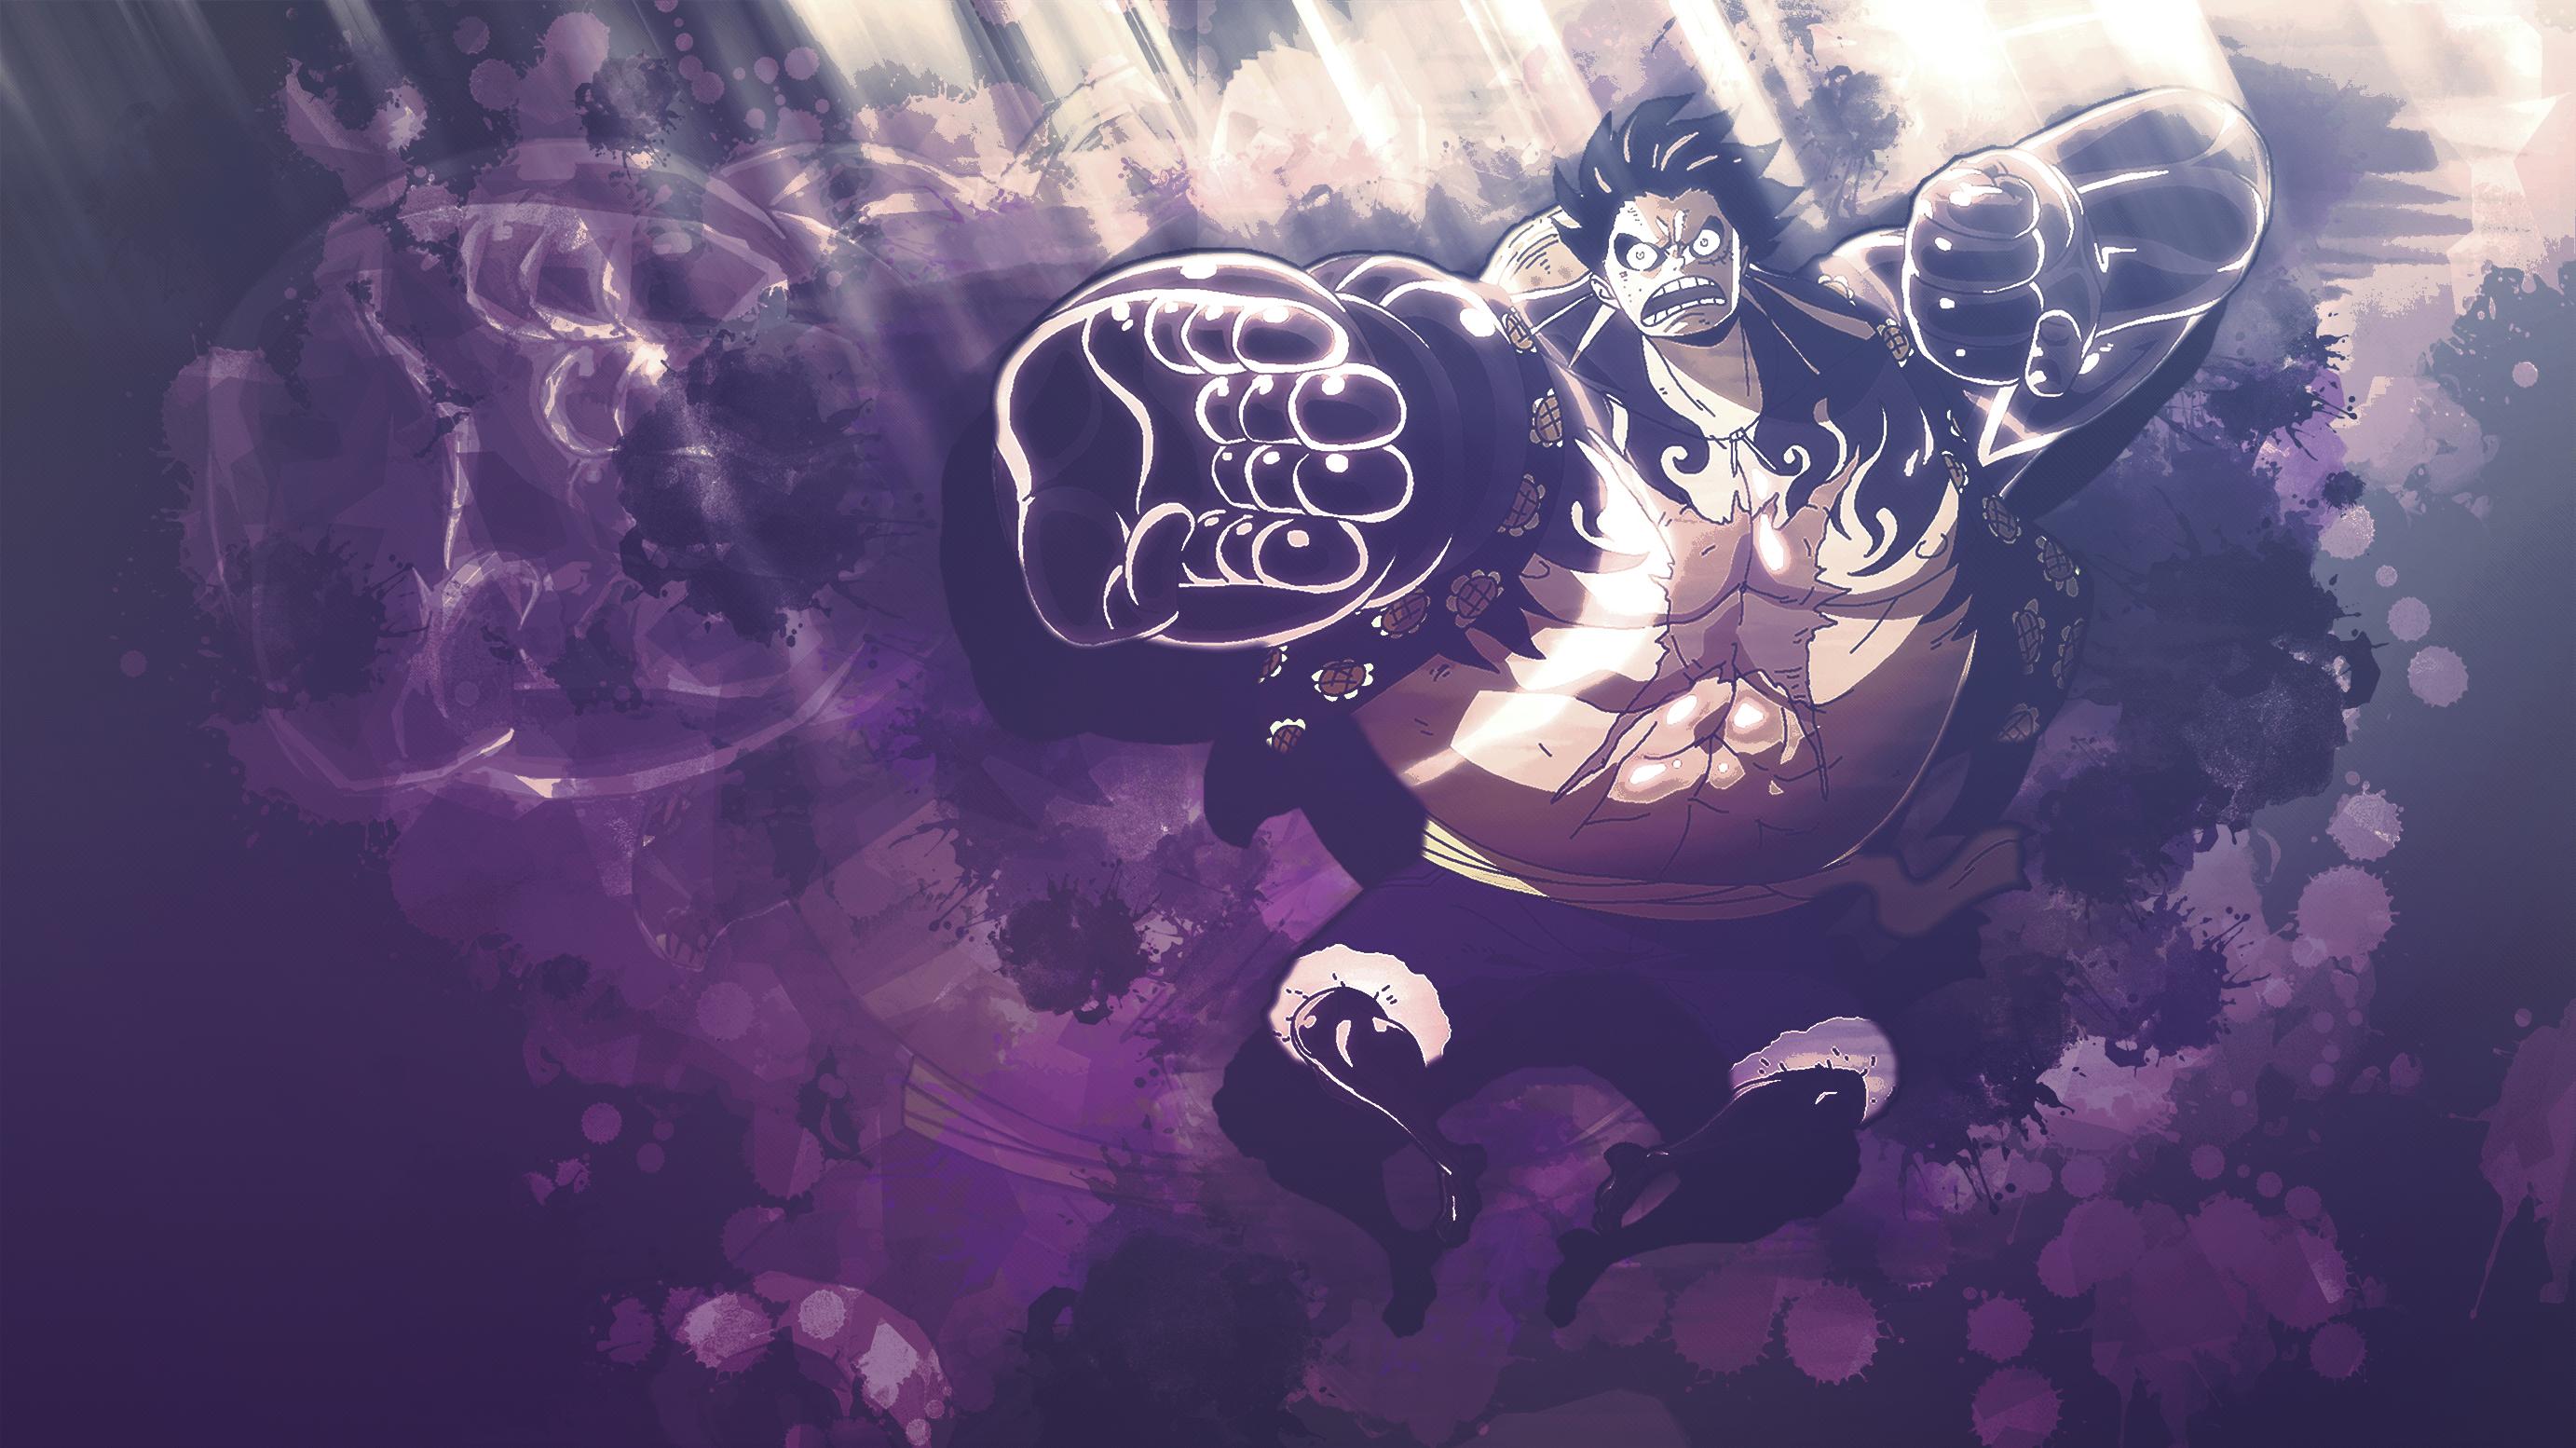 Anime One Piece HD Wallpaper By Roningfx